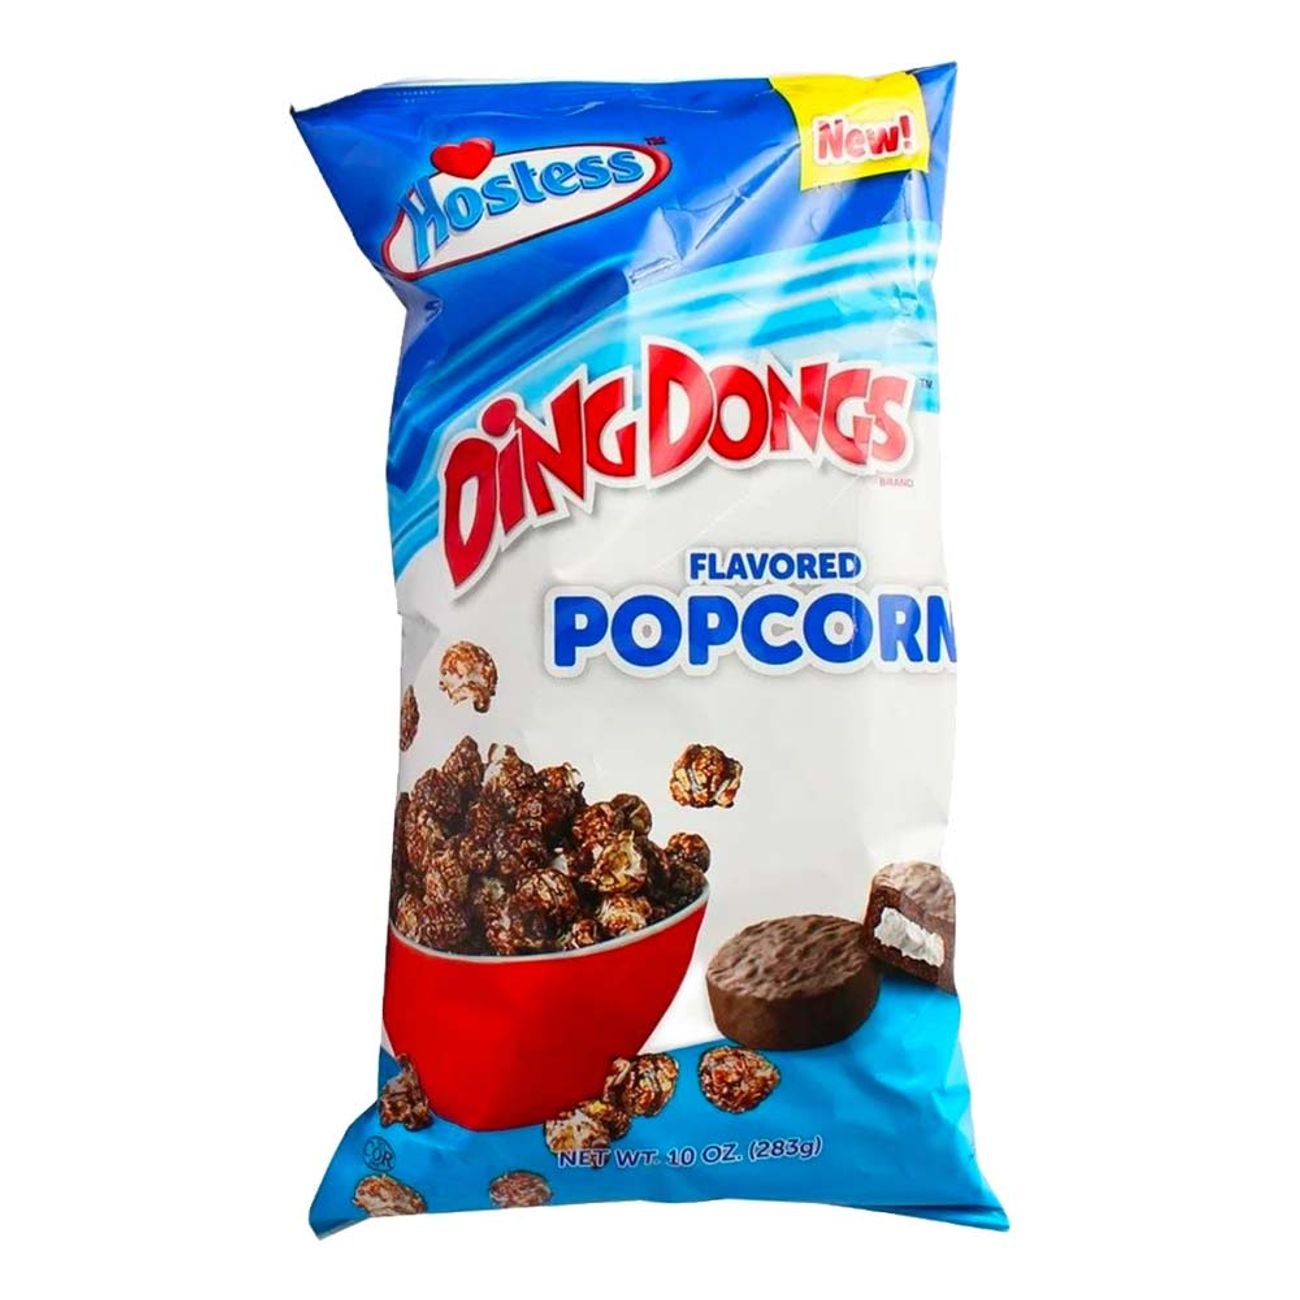 hostess-ding-dongs-flavored-popcorn-94856-1